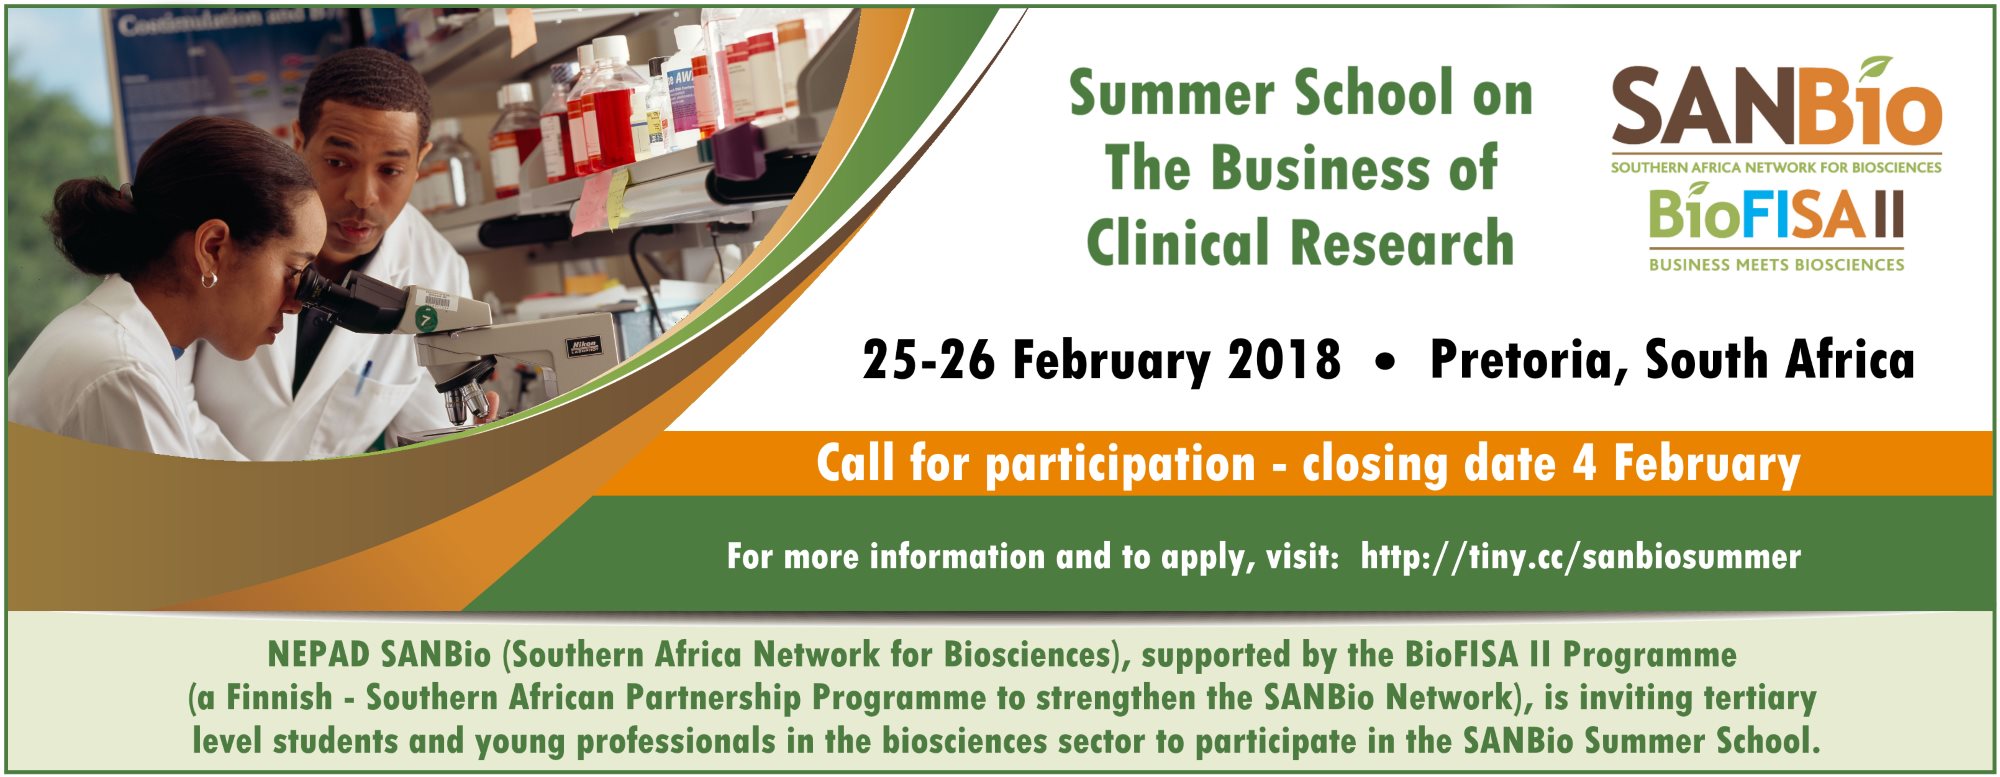 SANBio Summer School: The Business of Clinical Research -Pretoria South Africa ( Partially Funded)